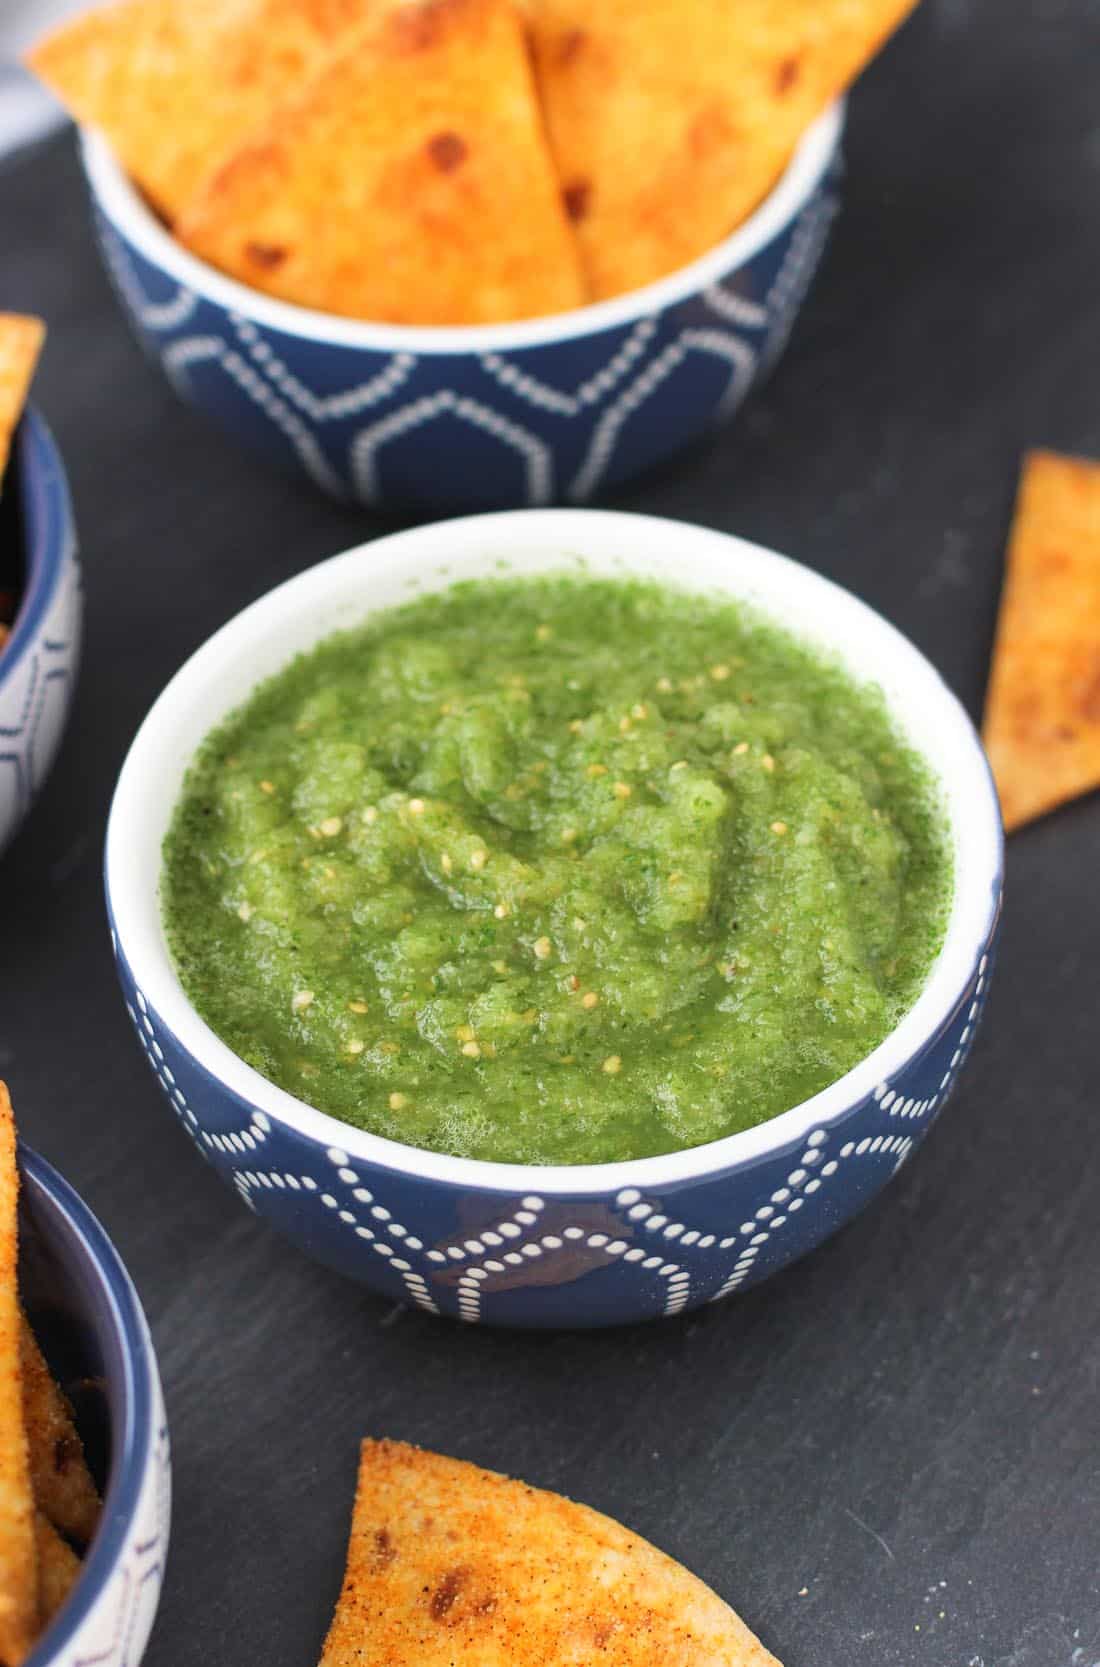 A bowl of salsa verde in front of bowls of tortilla chips.